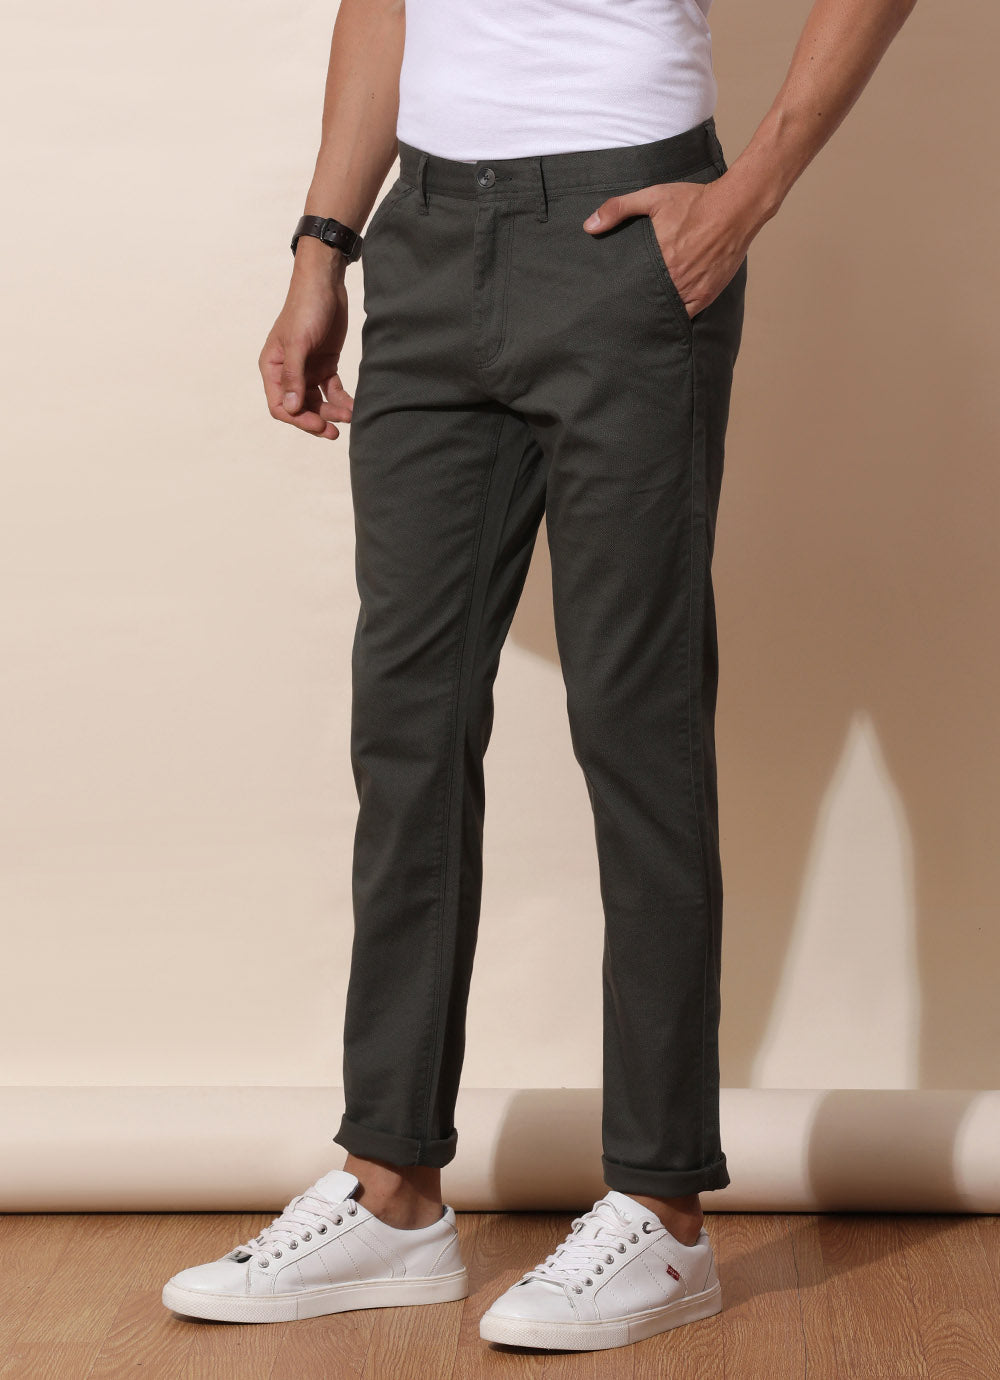 Olive Printed Slim Fit Cotton Trouser